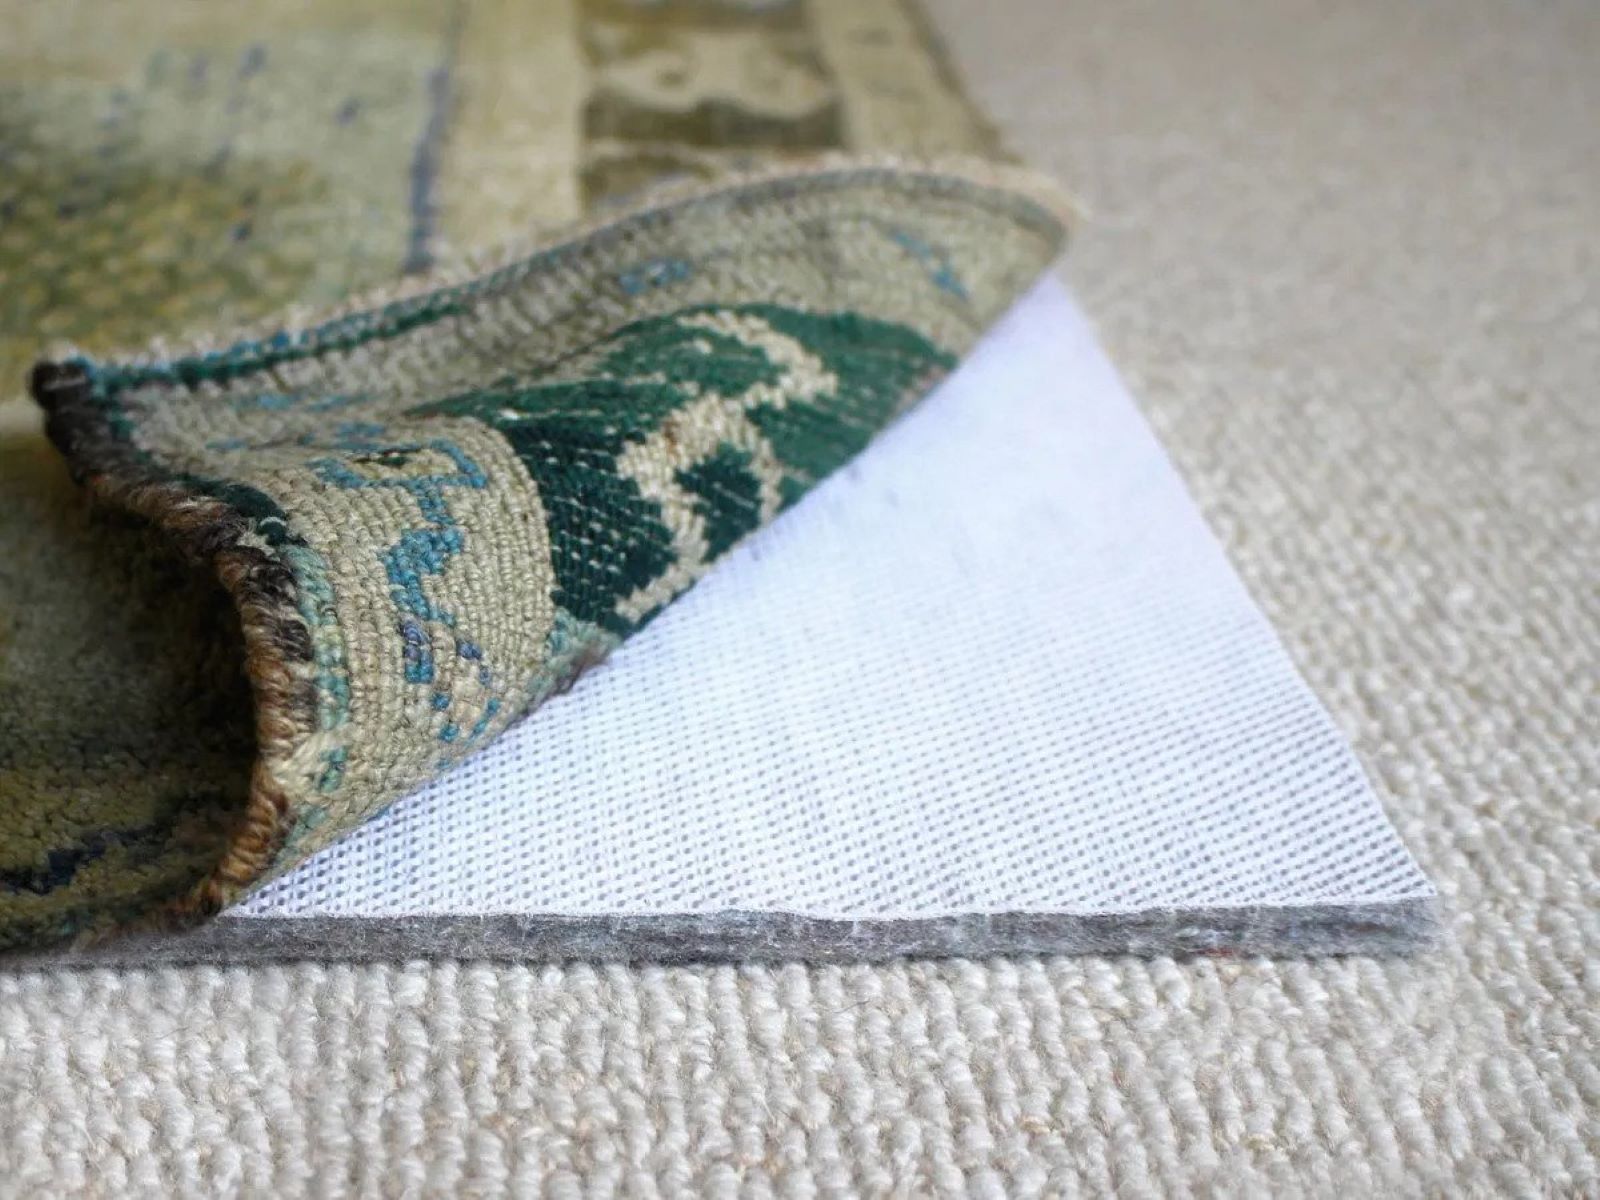 How To Prevent Carpet Runners From Moving